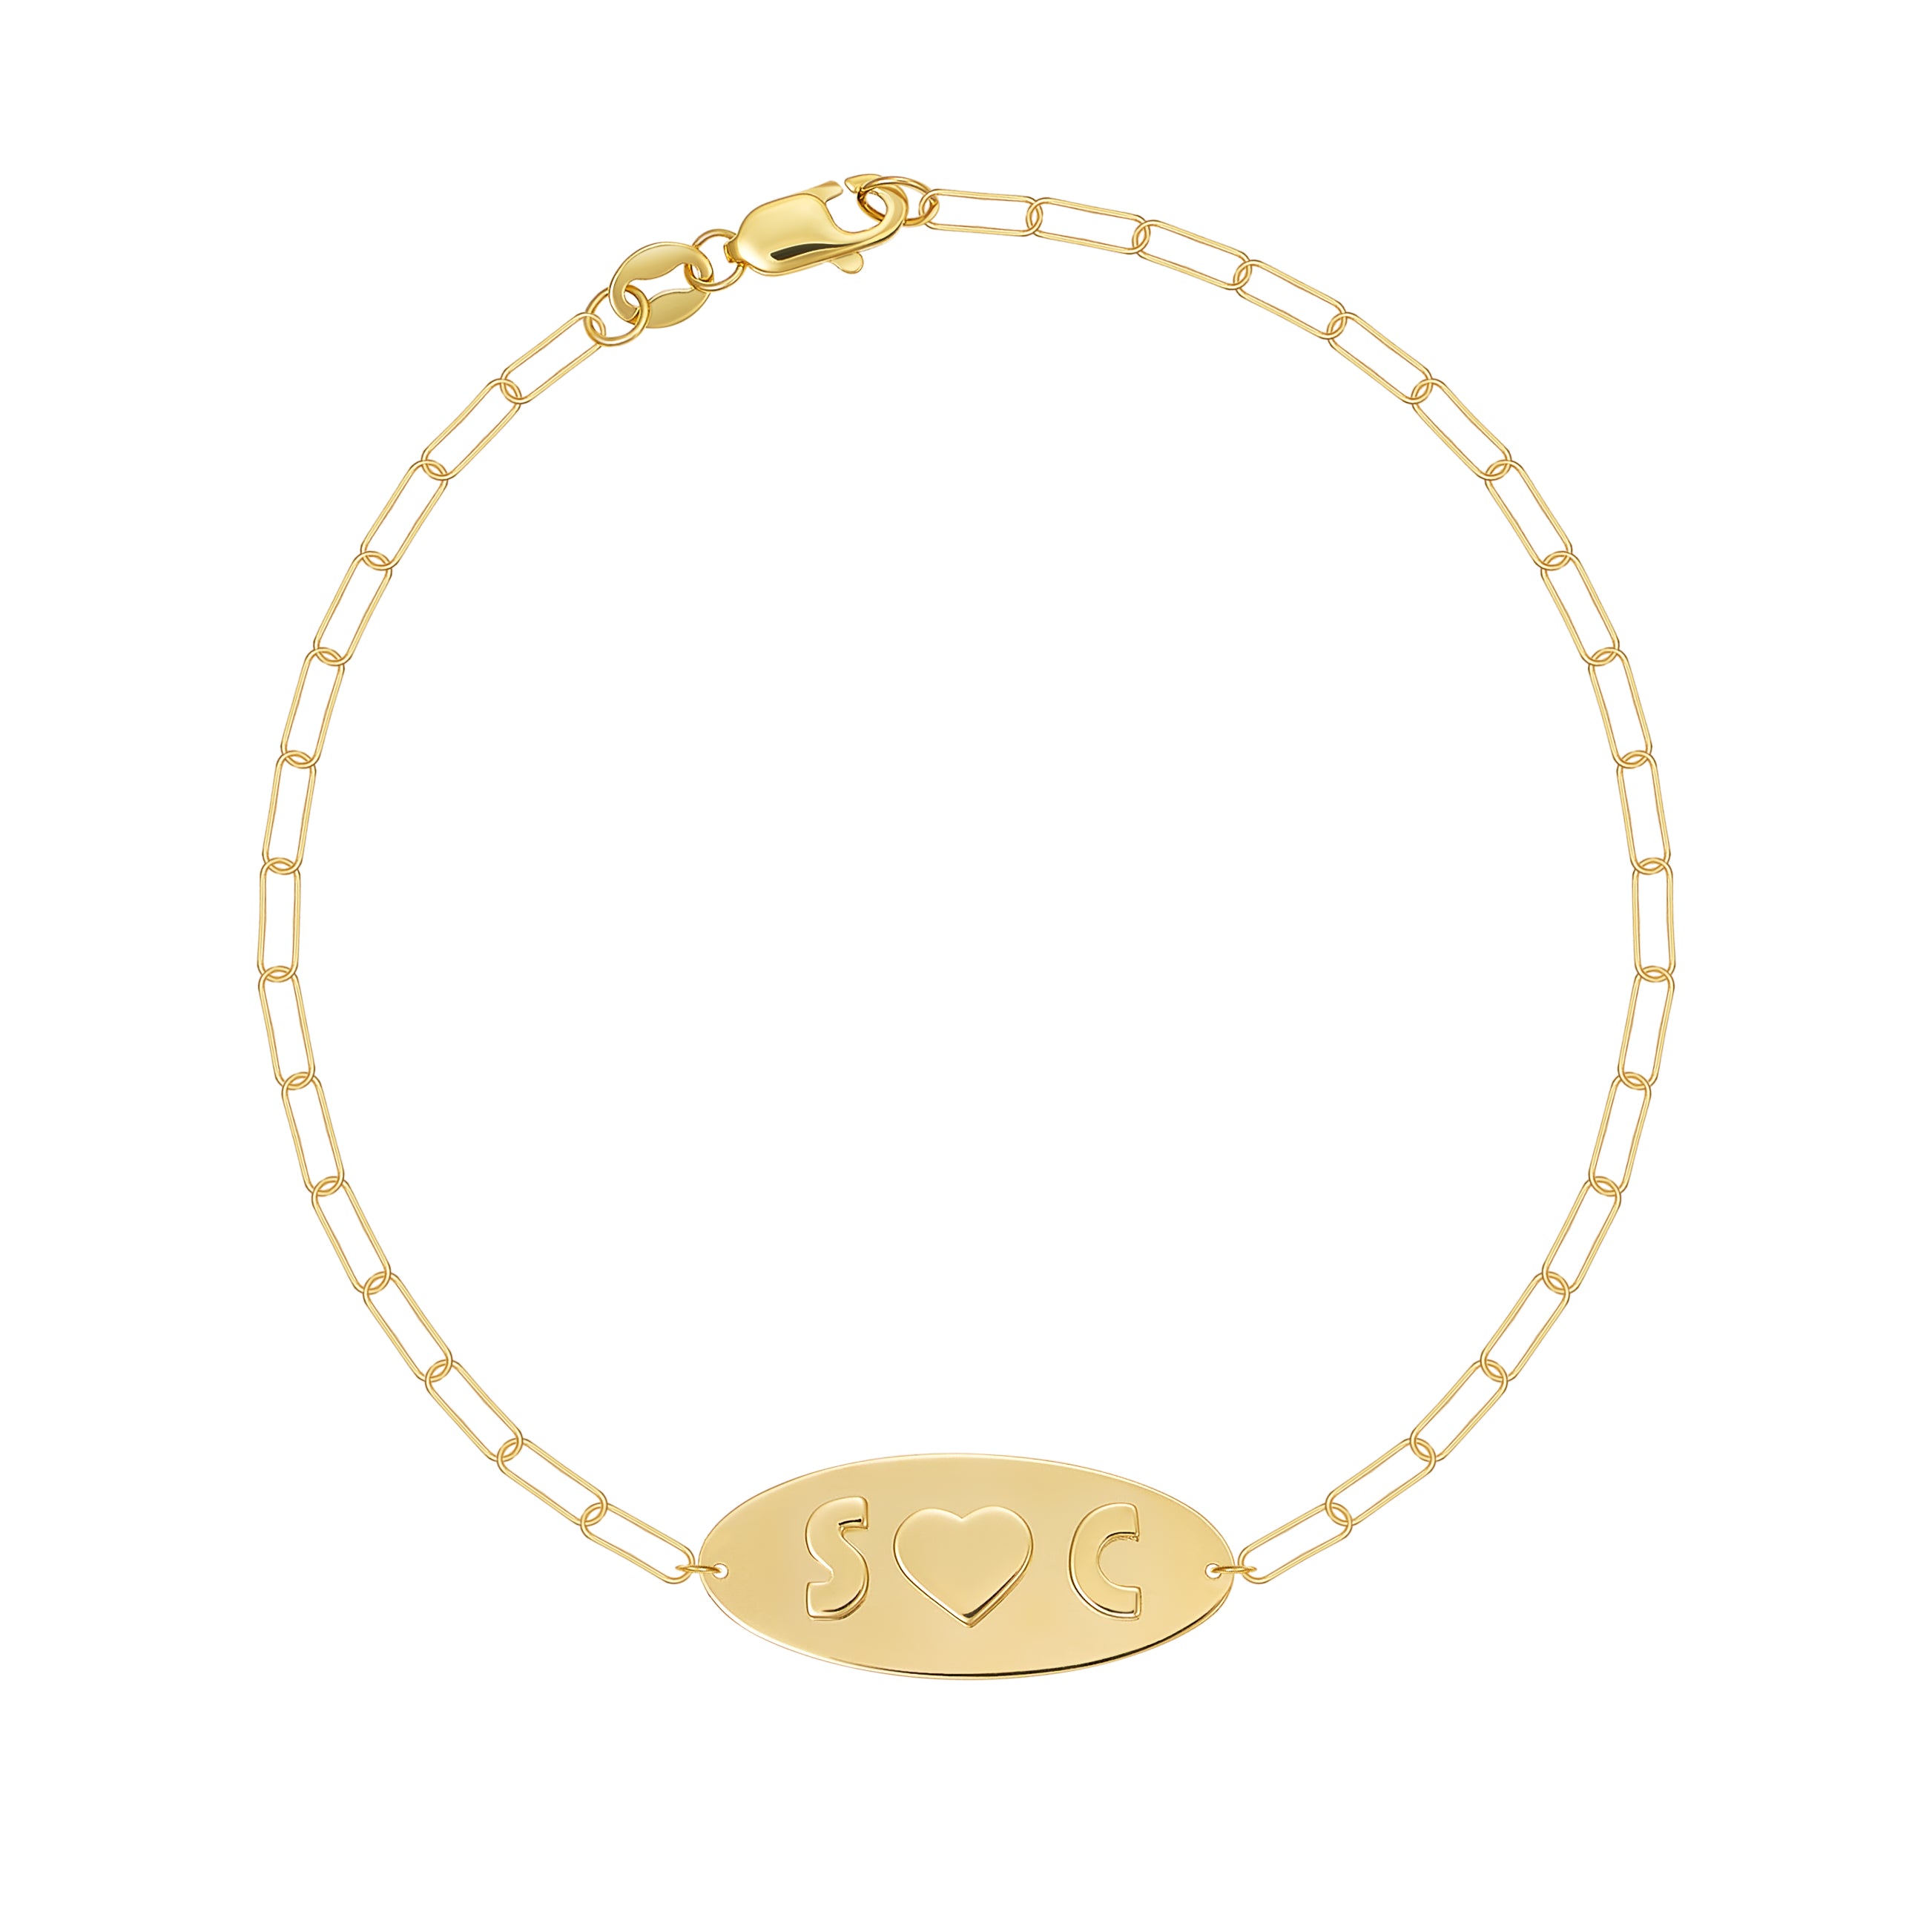 Oval Bracelet With Raised Letters